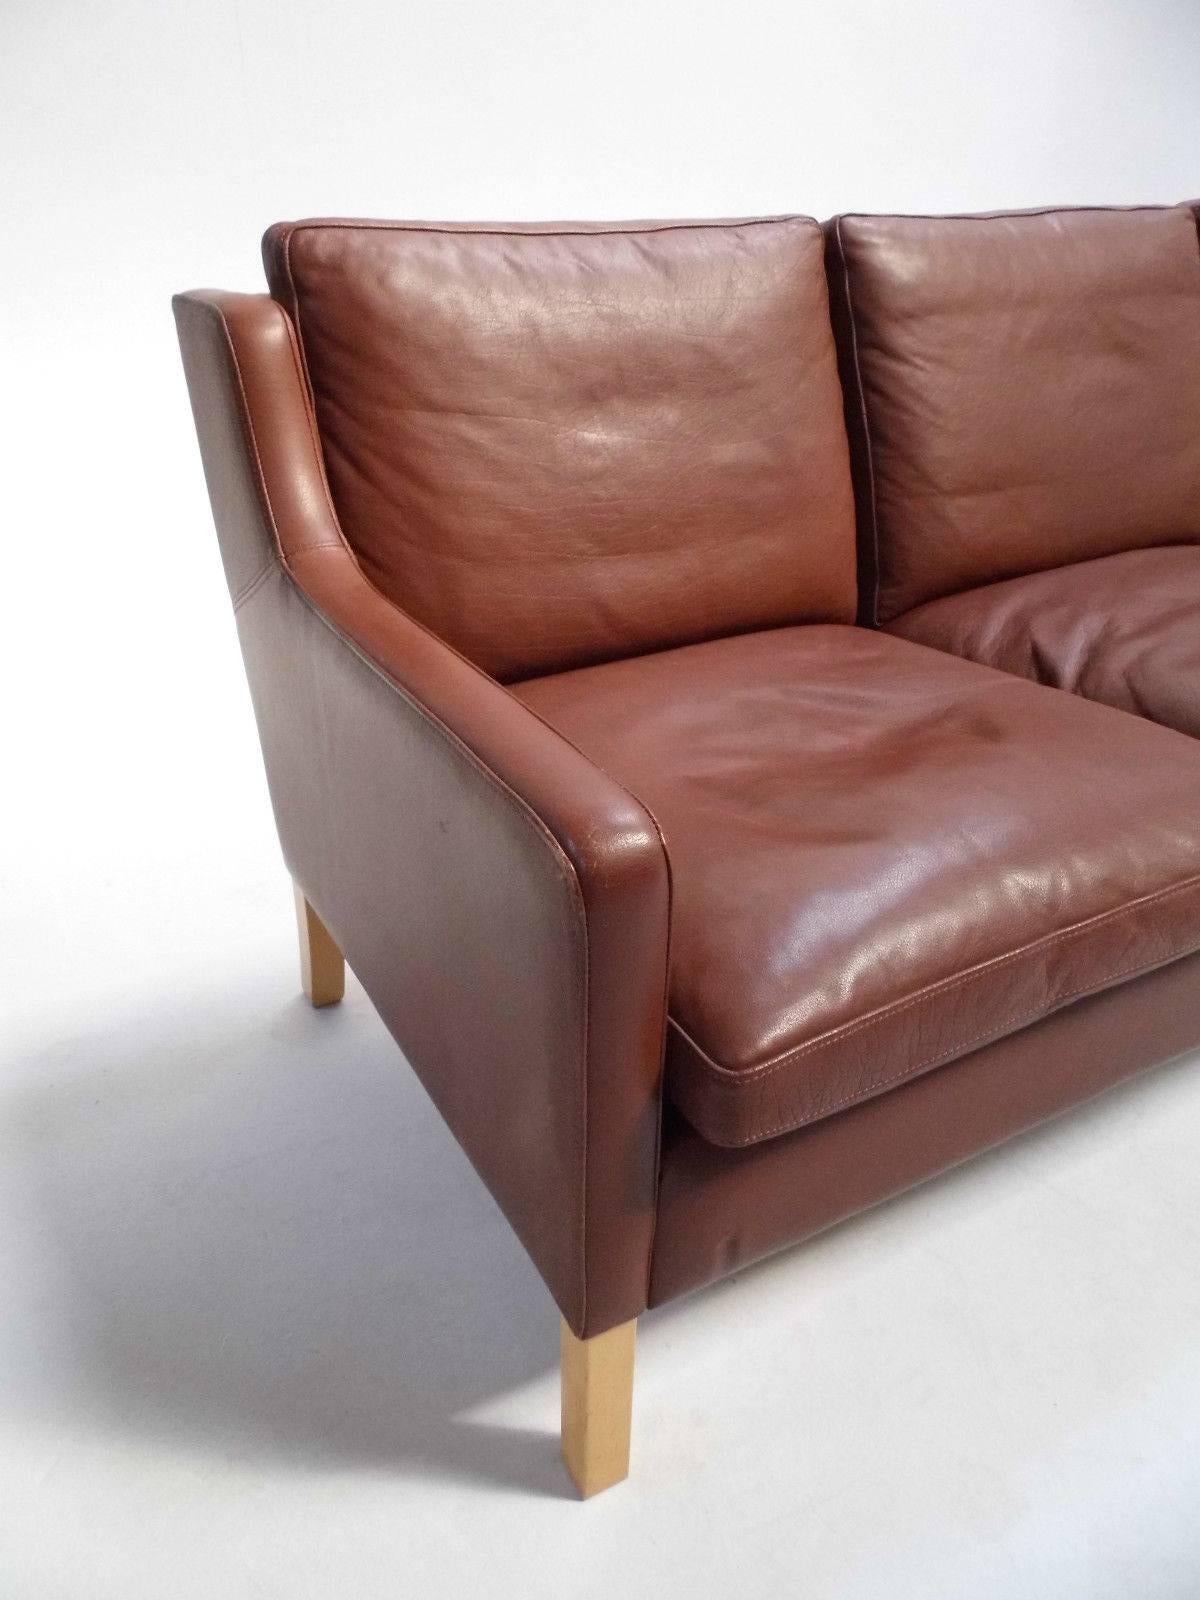 A beautiful Danish brown leather three-seat sofa by Stouby, this would make a stylish addition to any living or work area. The sofa has wide cushions and slim padded armrests for enhanced comfort. A striking piece of Classic Scandinavian